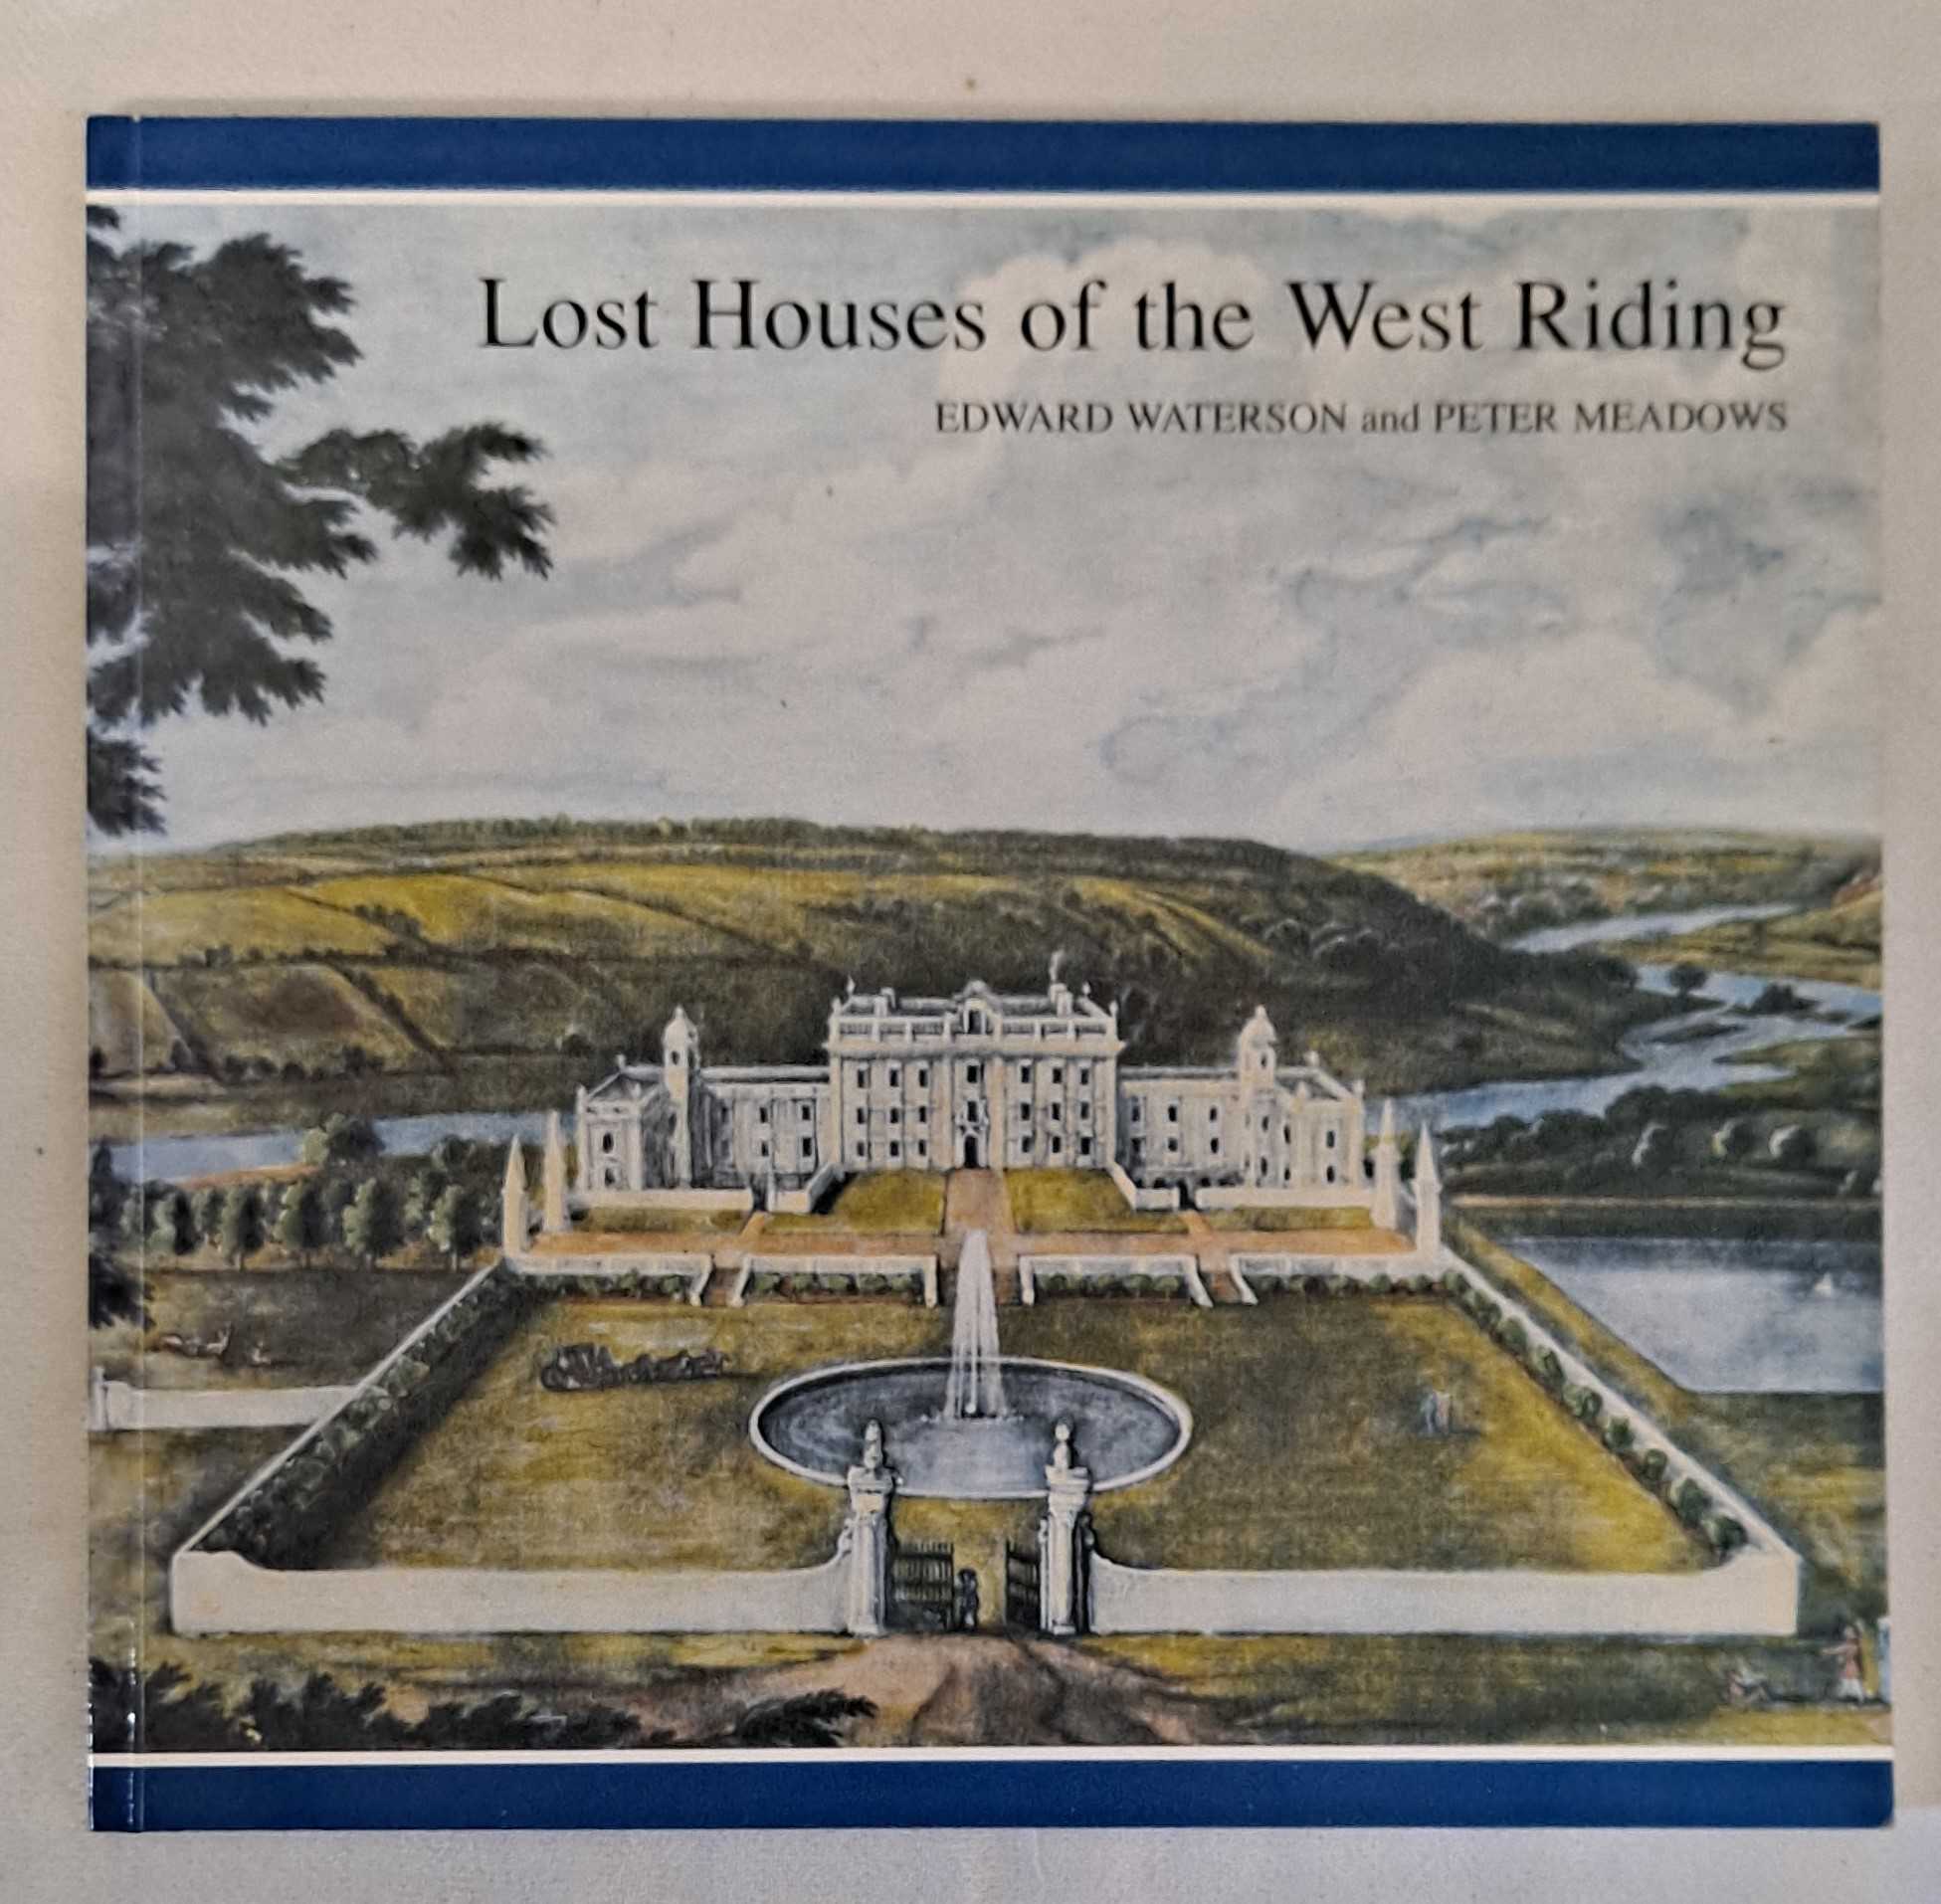 Edward Waterson and Peter Meadows, Foreword by John Harris - Lost Houses of the West Riding